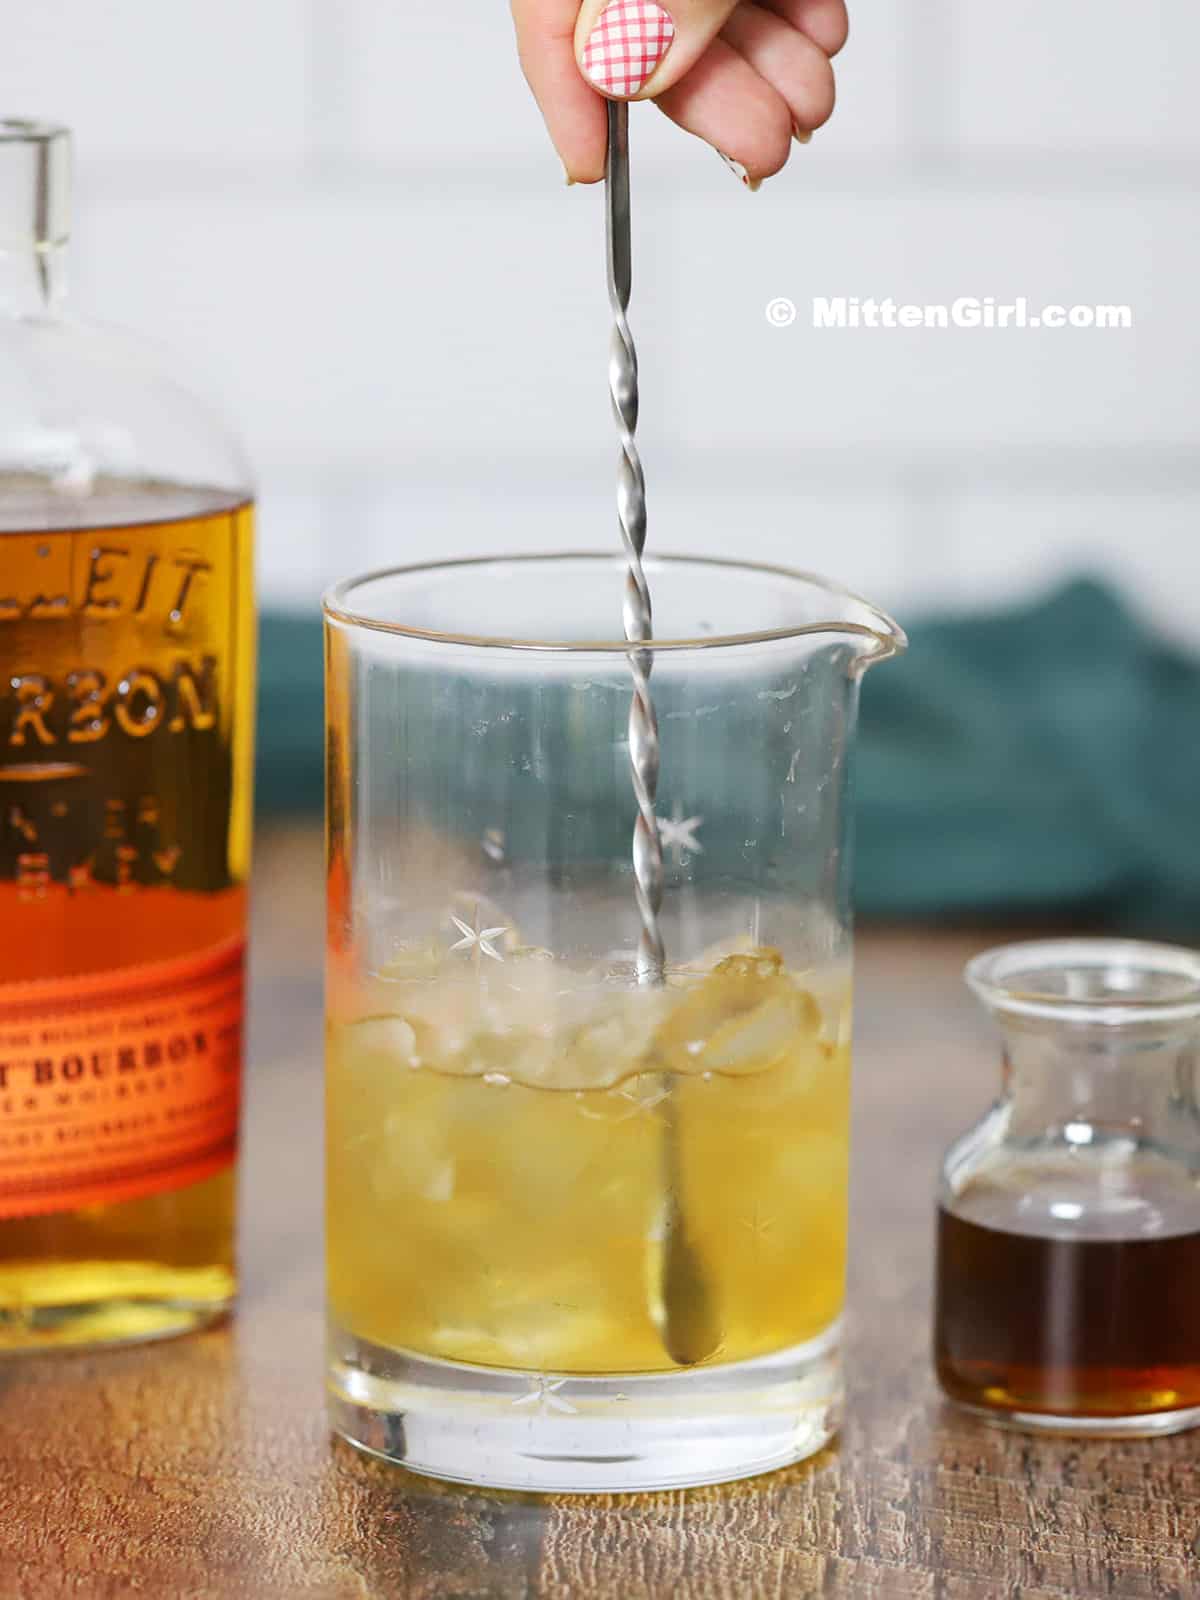 Bourbon being stirred in a mixing glass filled with ice.